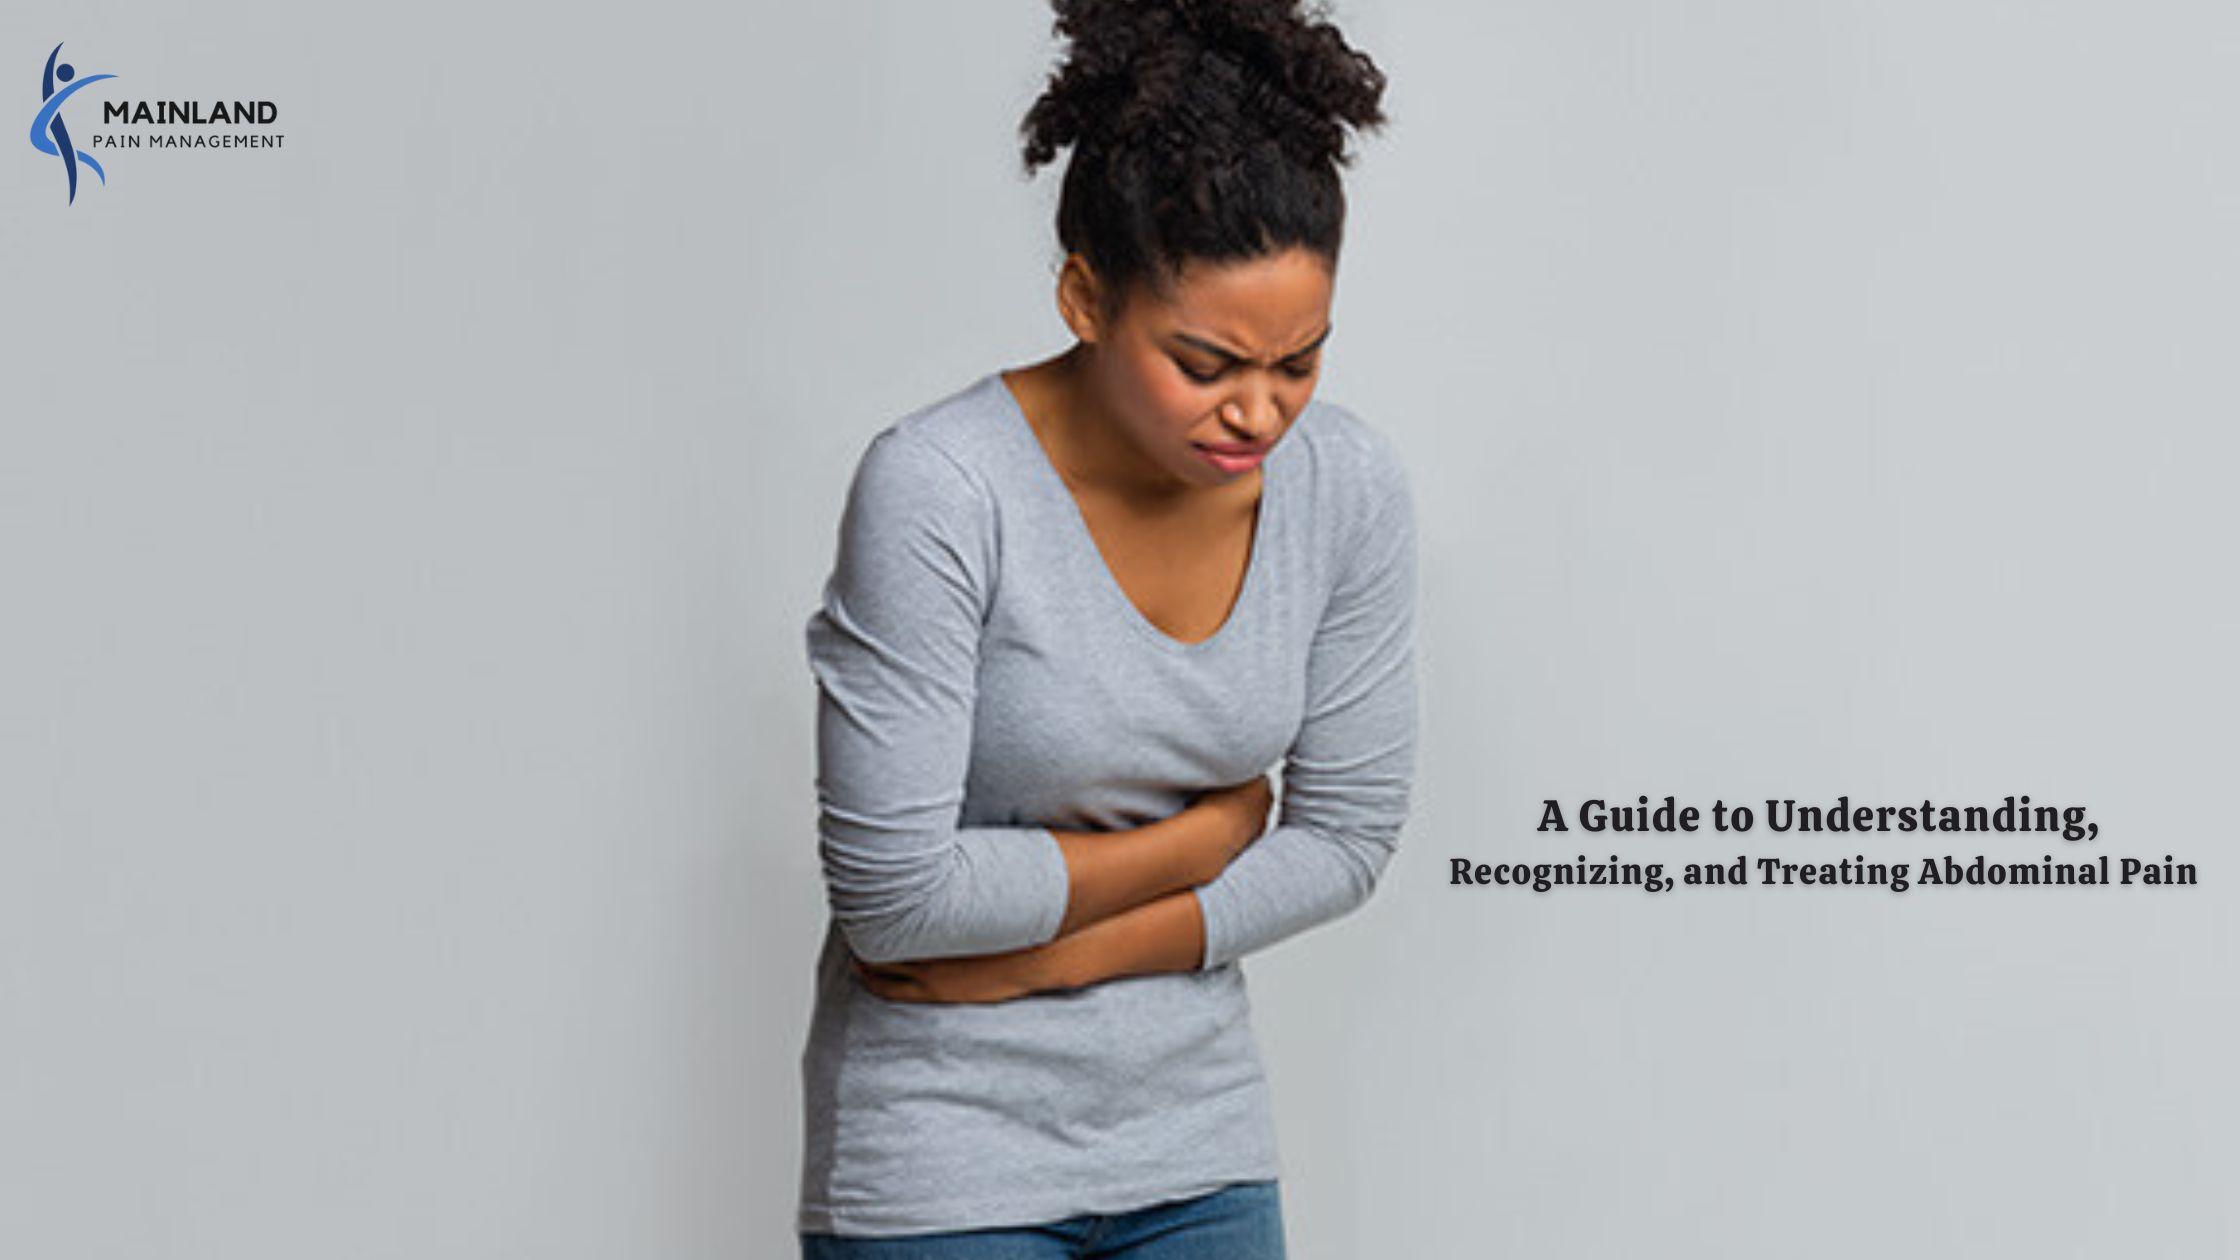 A Guide to Understanding, Recognizing, and Treating Abdominal Pain